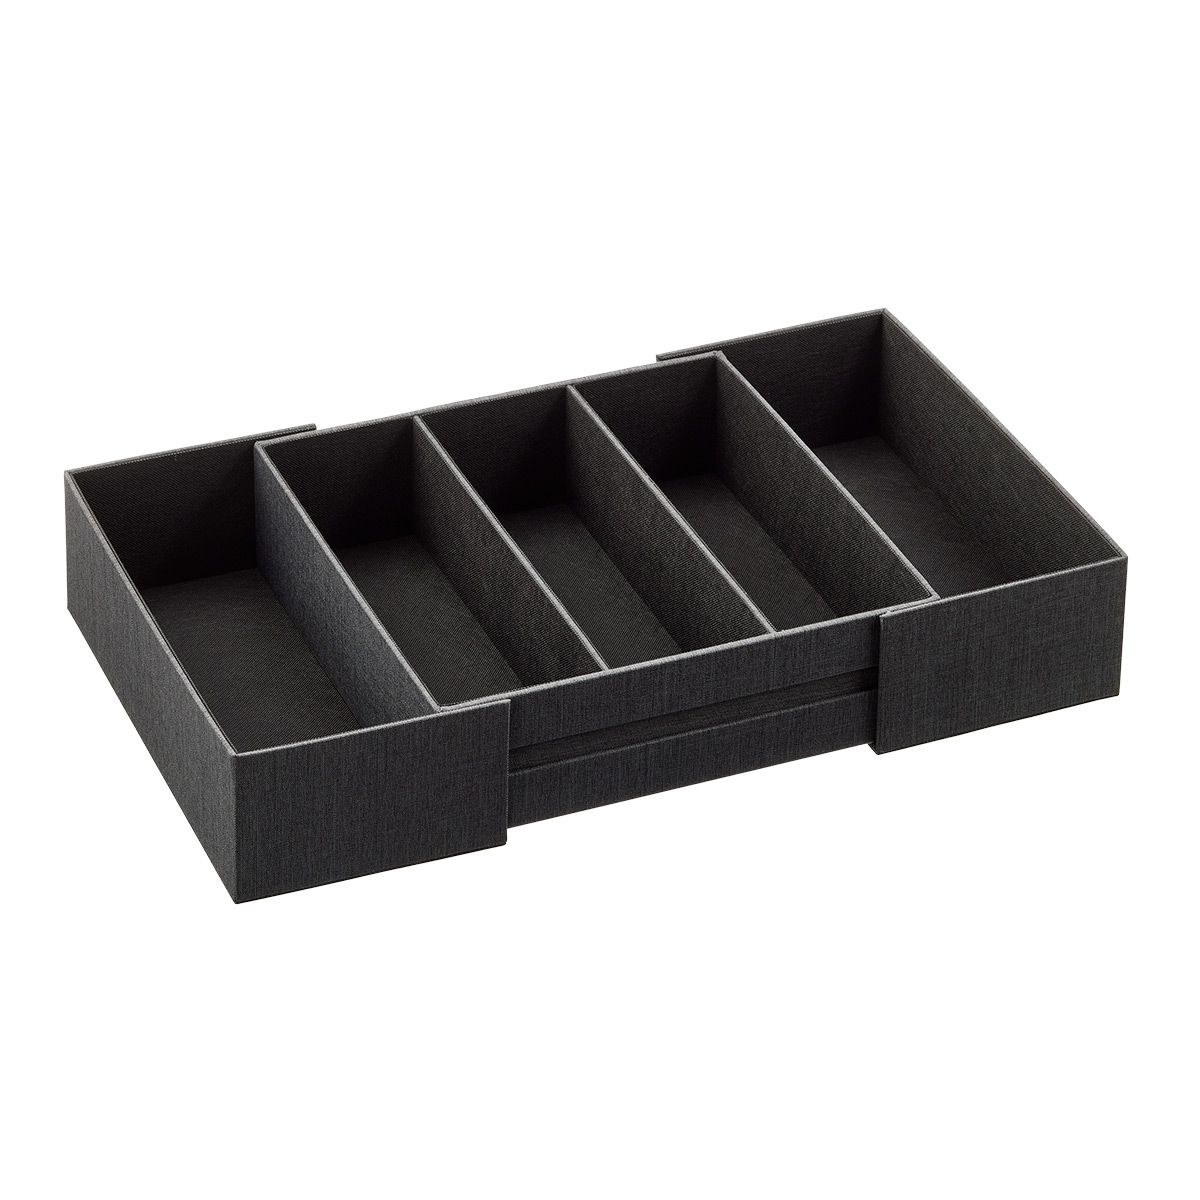 Cambridge 5-Section Expandable Drawer Organizers | The Container Store